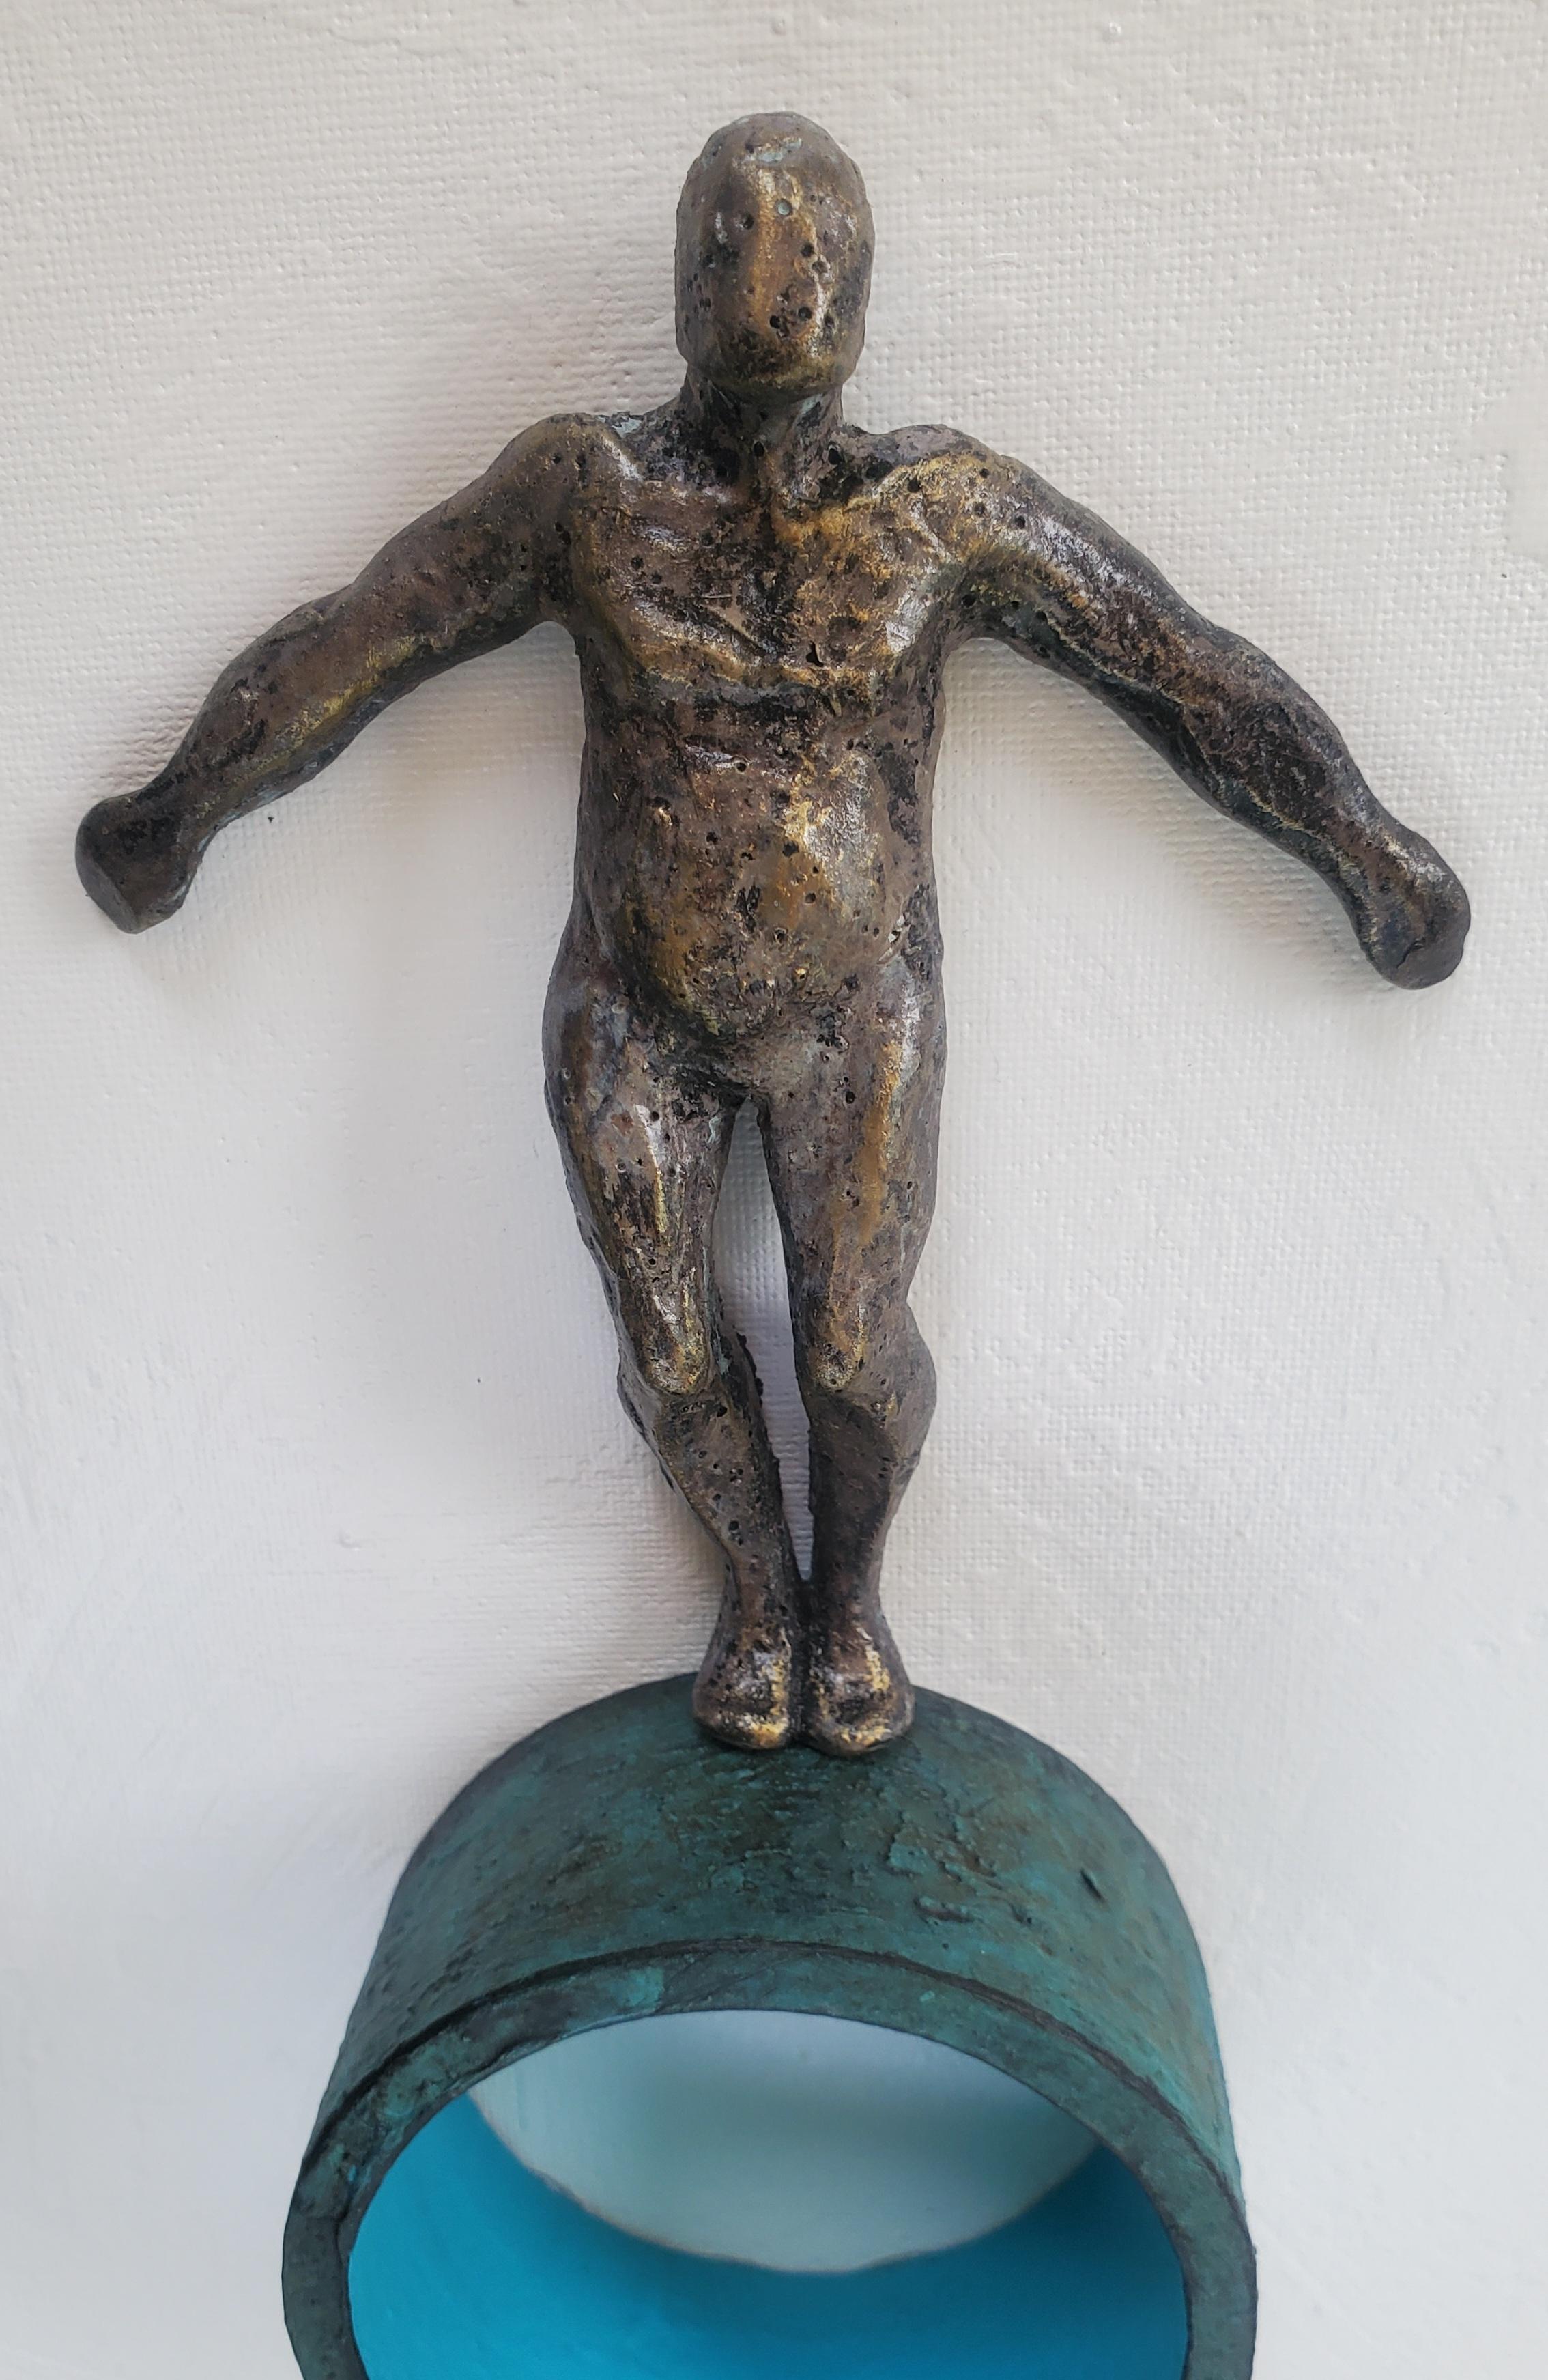 <p>Artist Comments<br>Artist Yelitza Diaz presents a bronze-painted figure balancing itself on a round structure encrusted in a patina-like texture. Inspired once again by minimalism, she considers the possibility of contradicting the style by